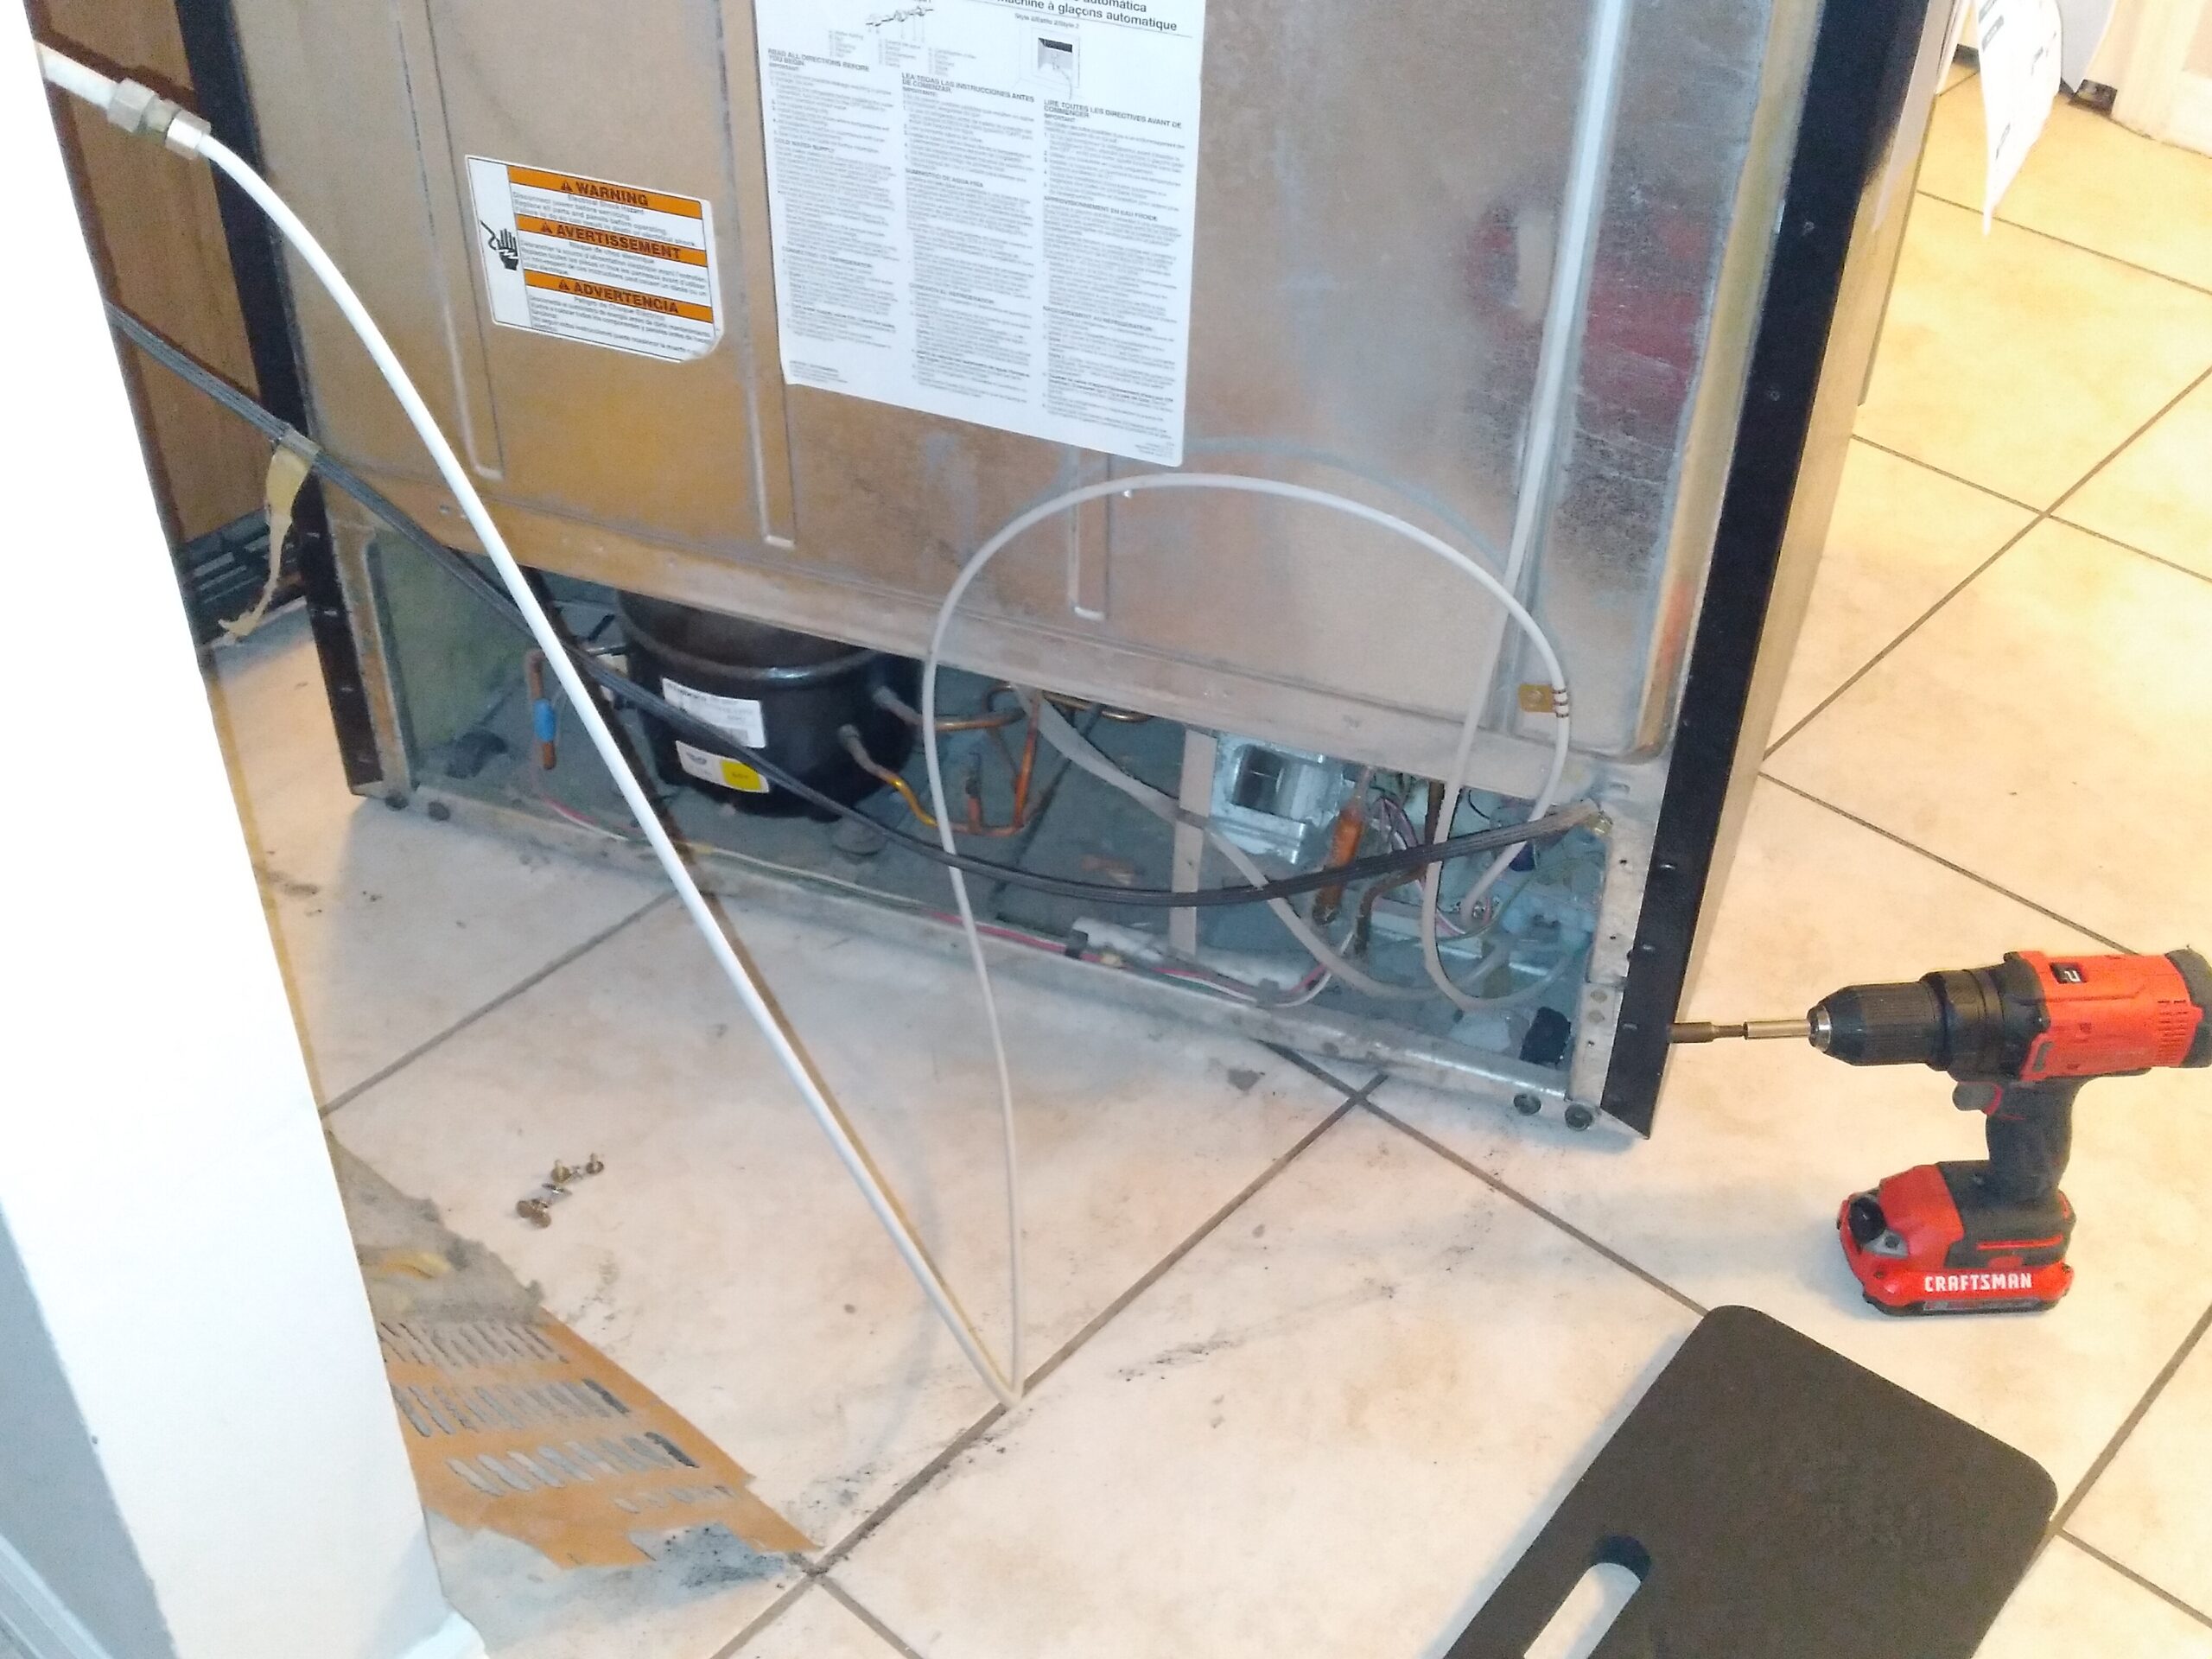 appliance repair refrigerator repair loud noise coming from underneath coil revival pl oakland fl 34787